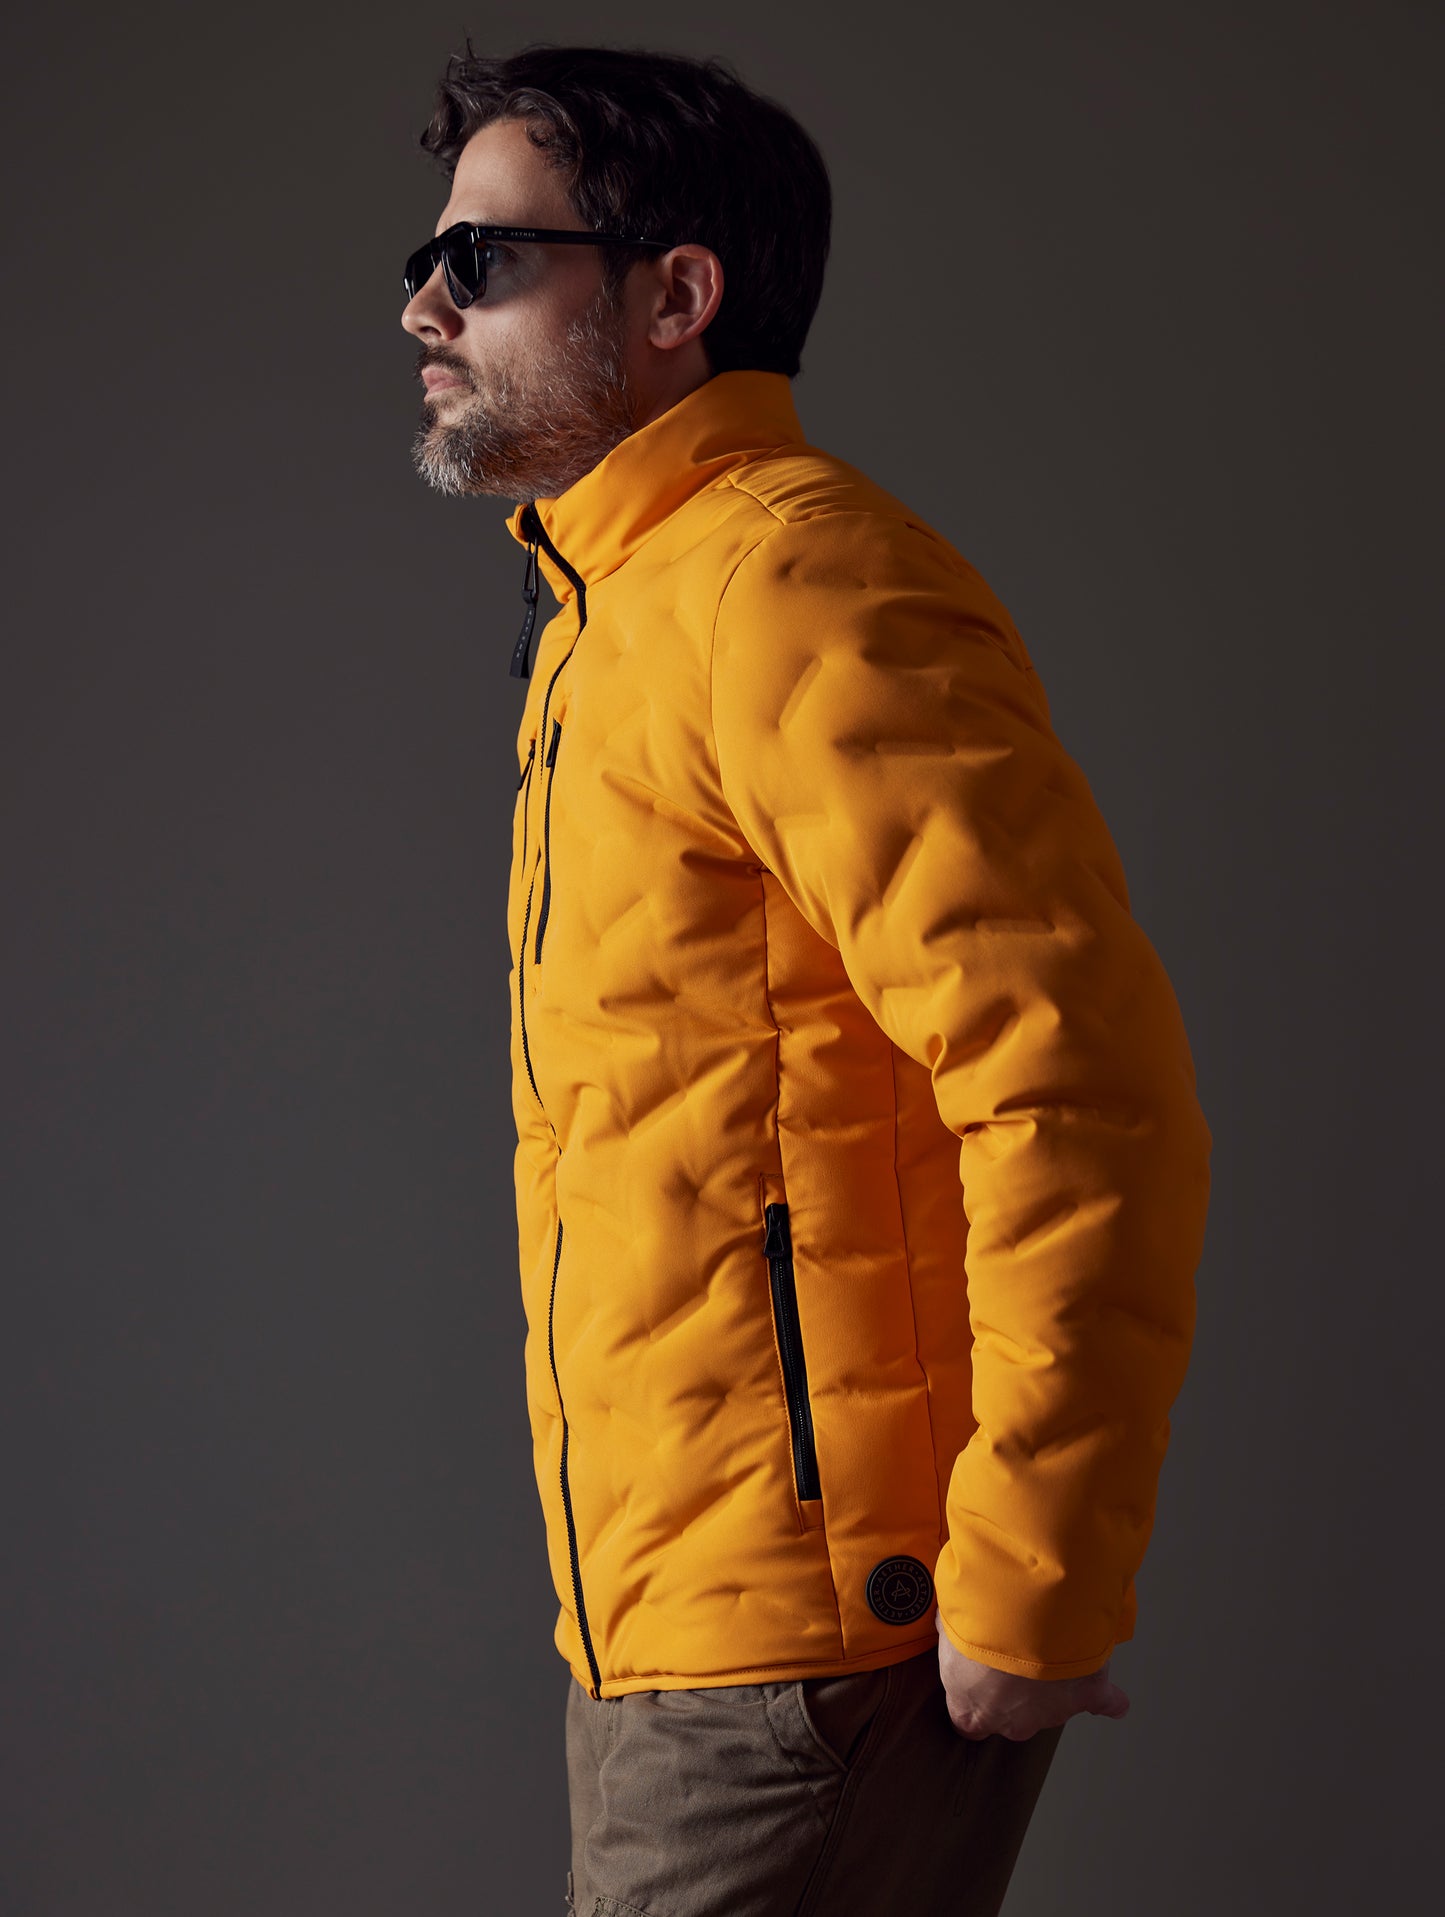 Man wearing orange insulated jacket from AETHER Apparel